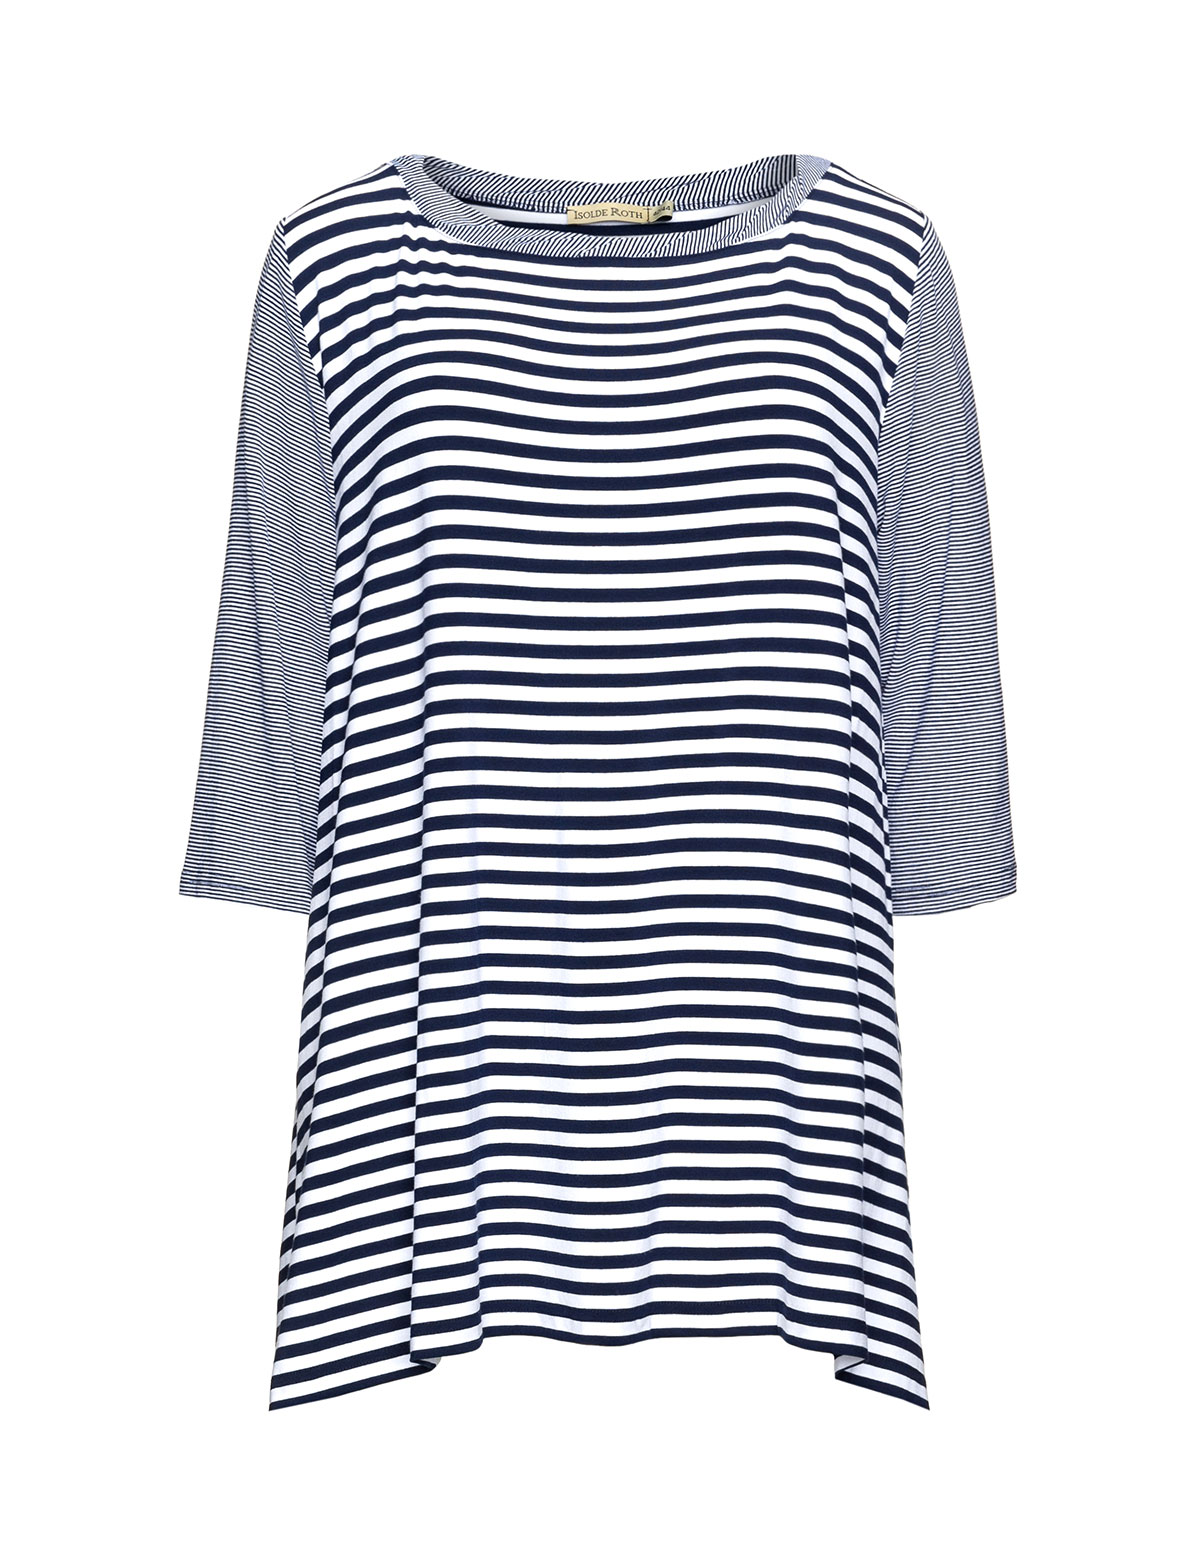 Striped jersey top by
Isolde Roth